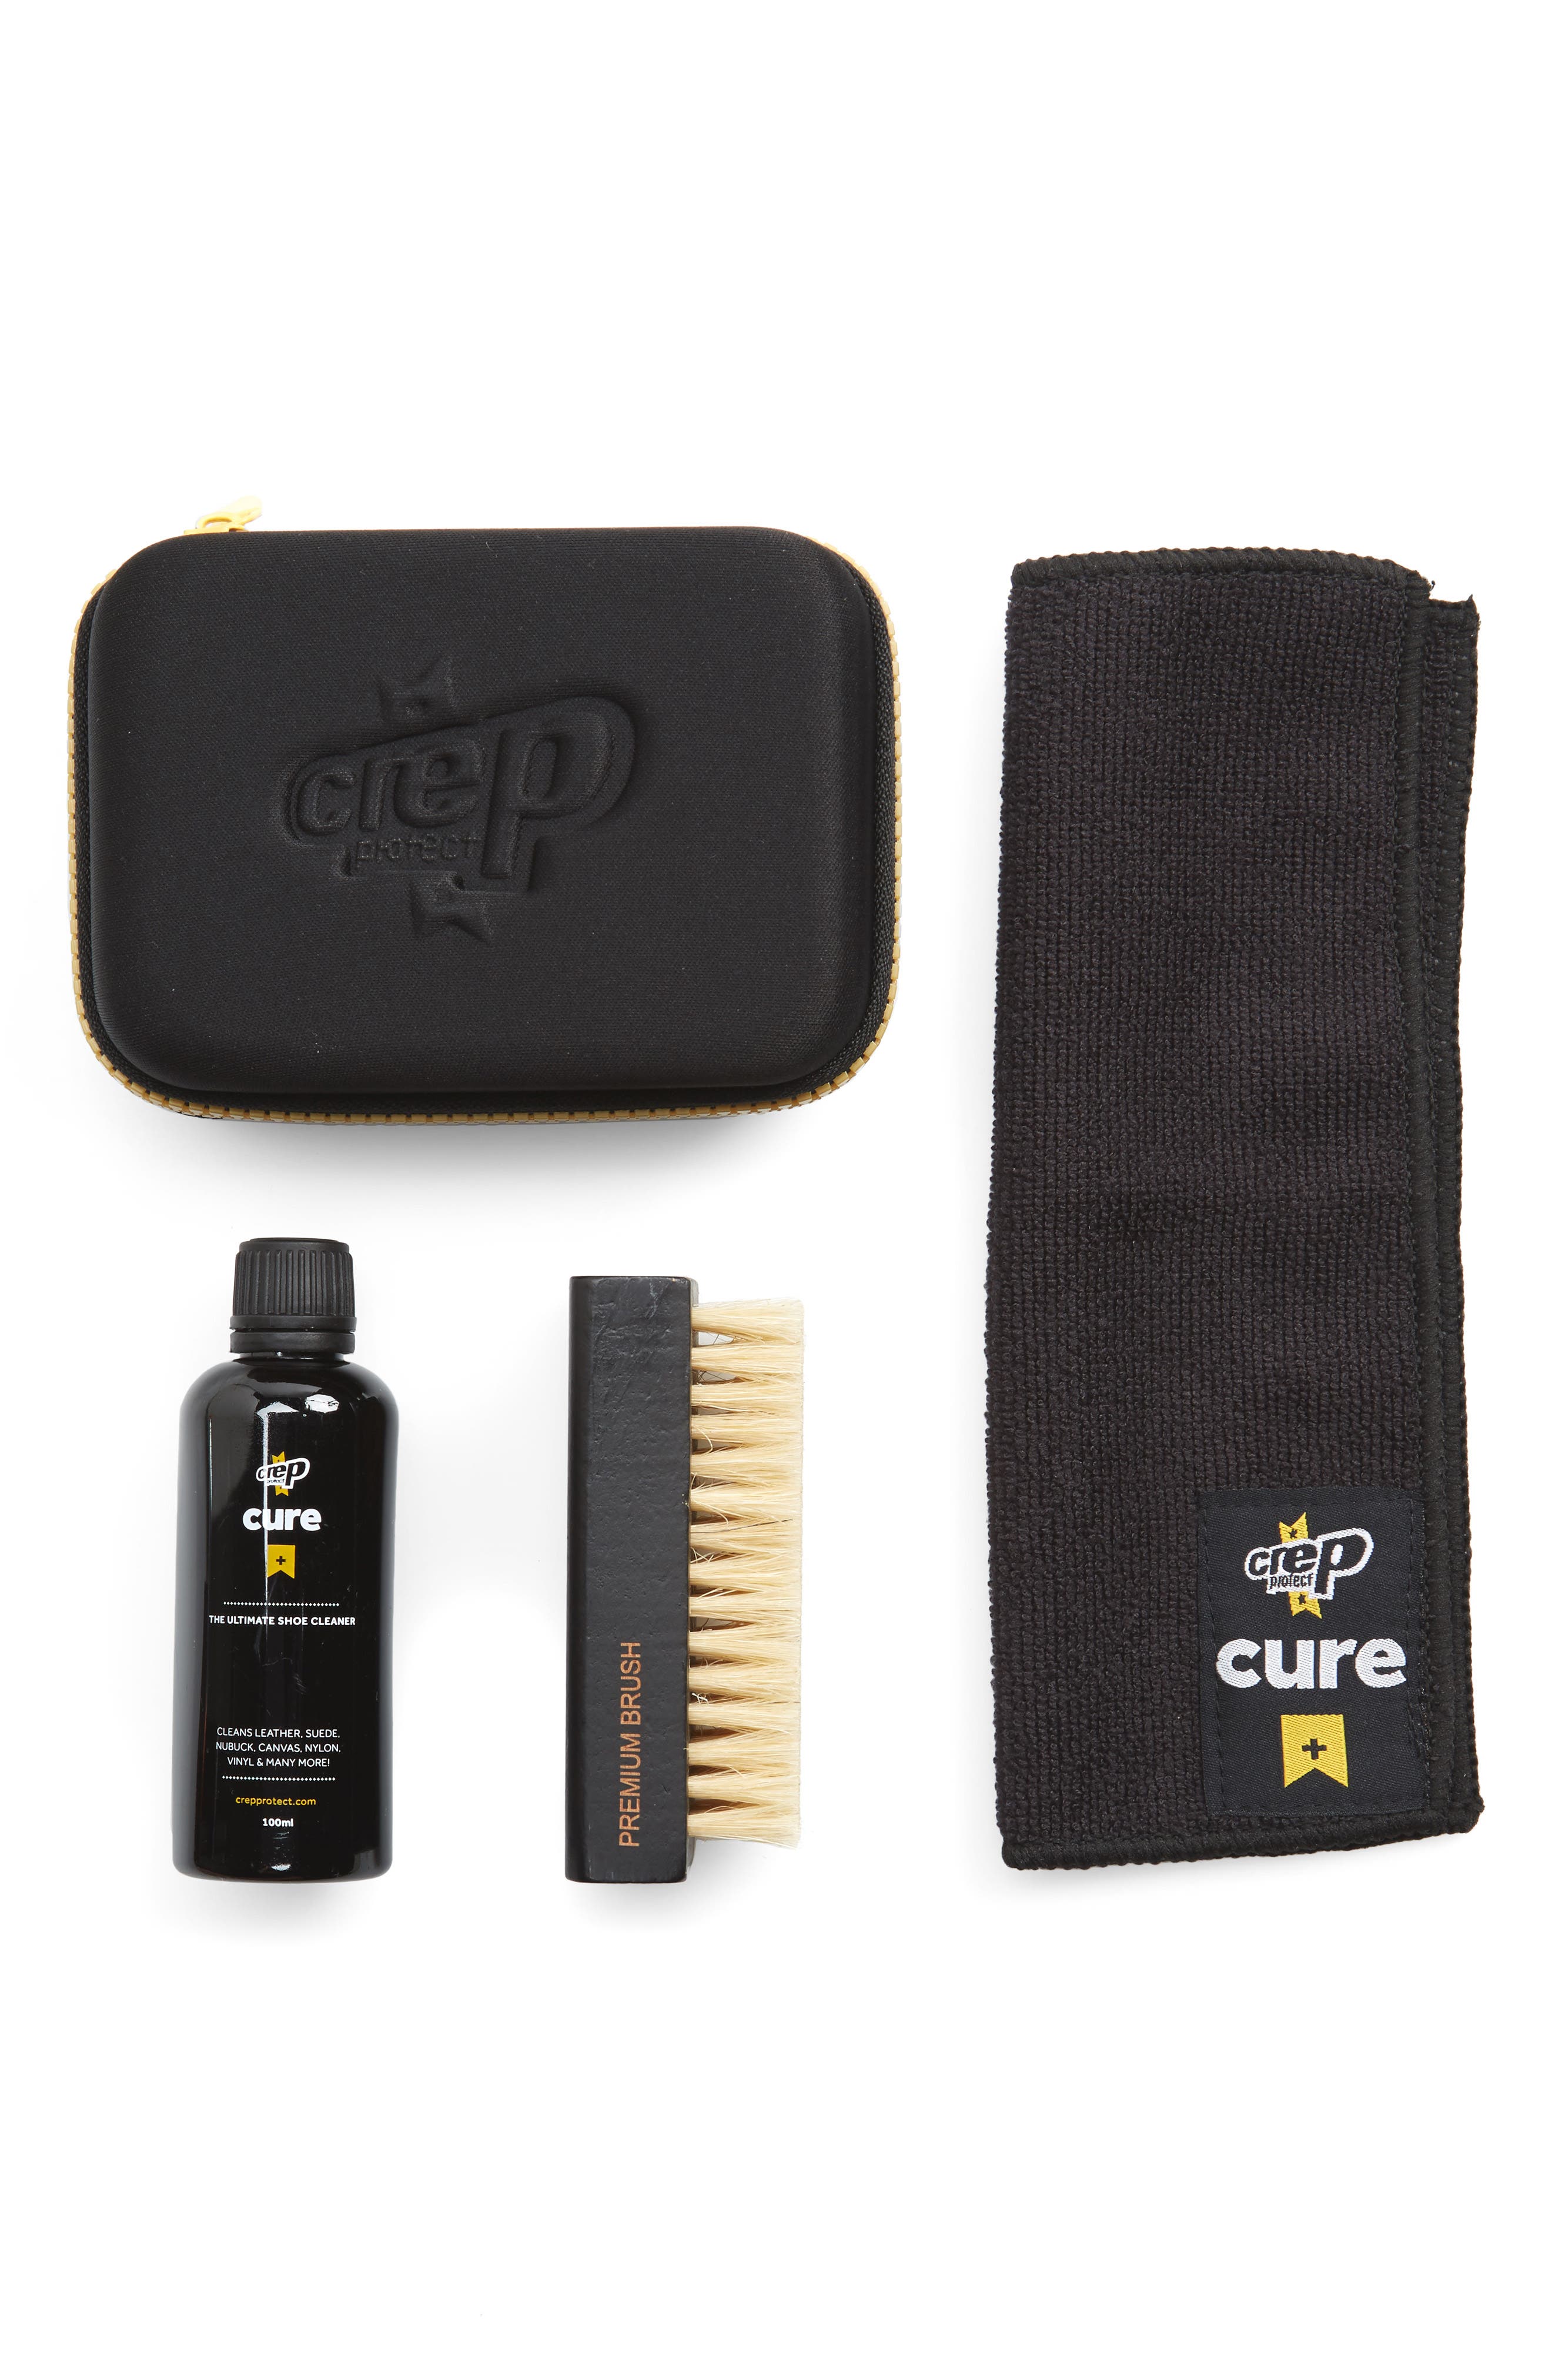 crep protect cure travel kit